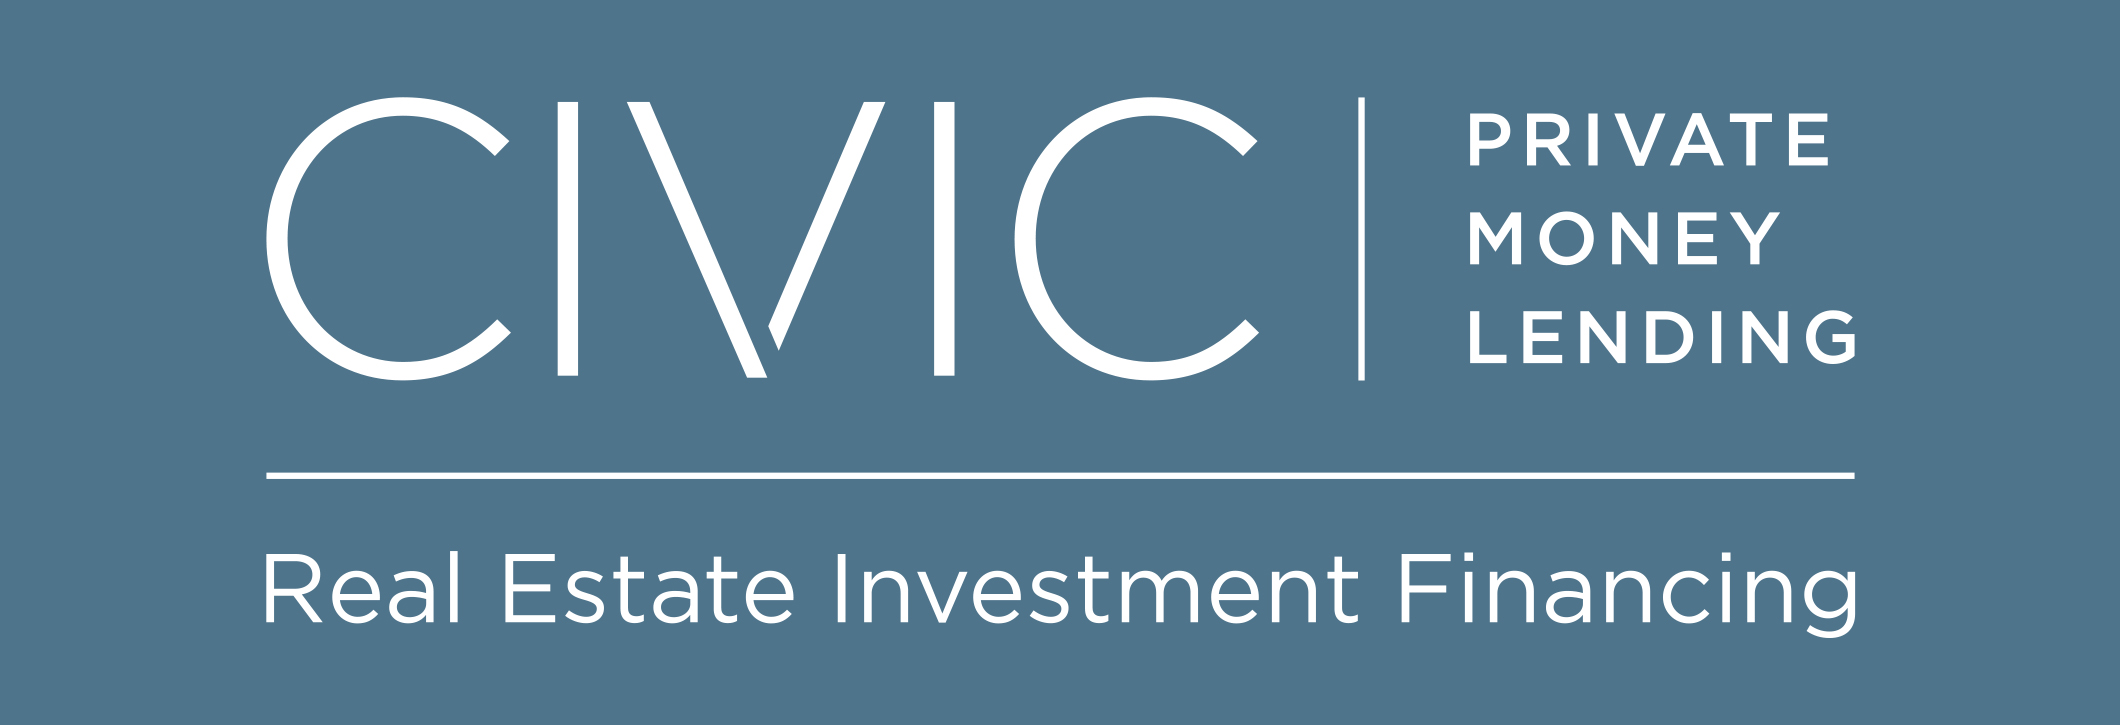 Civic Financial Services - Real Estate Investment Financing